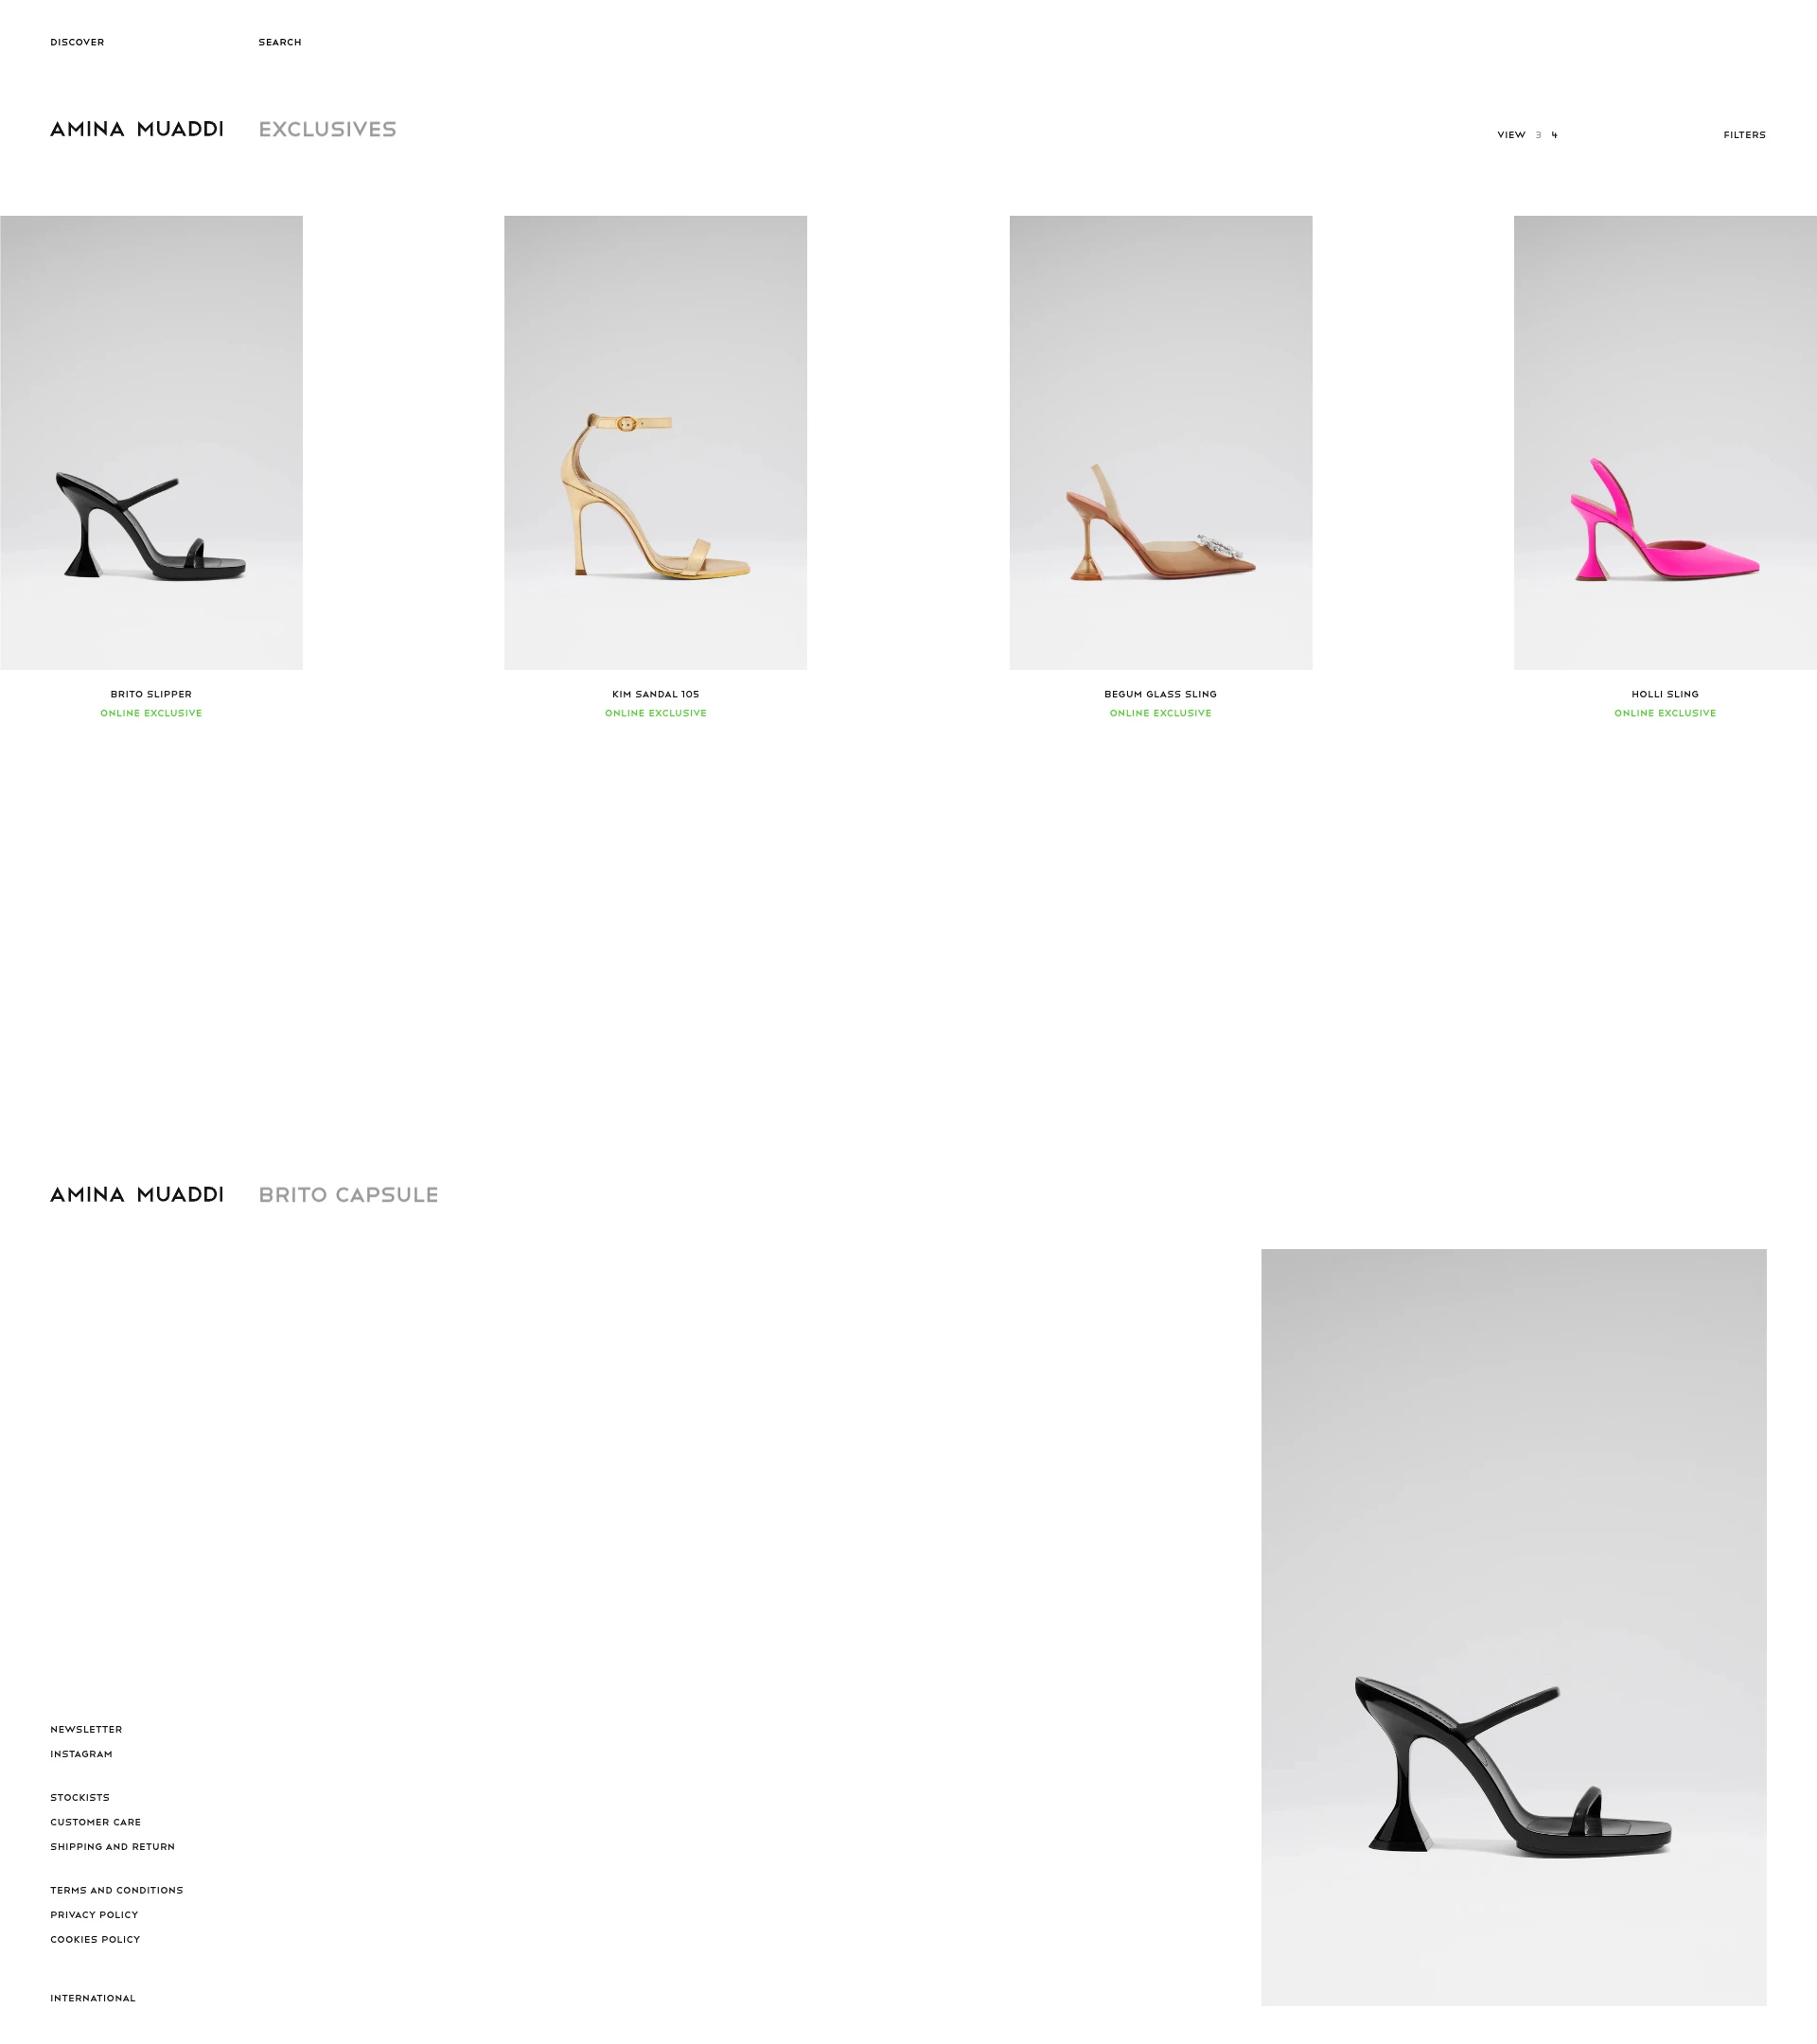 Amina Muaddi Landing Page Example: Discover and shop the collection of Amina Muaddi shoes, bags, and jewelry on the brand's official website. All products are designed in Paris and handcrafted in Italy. Enjoy complimentary international shipping and returns on all purchases.